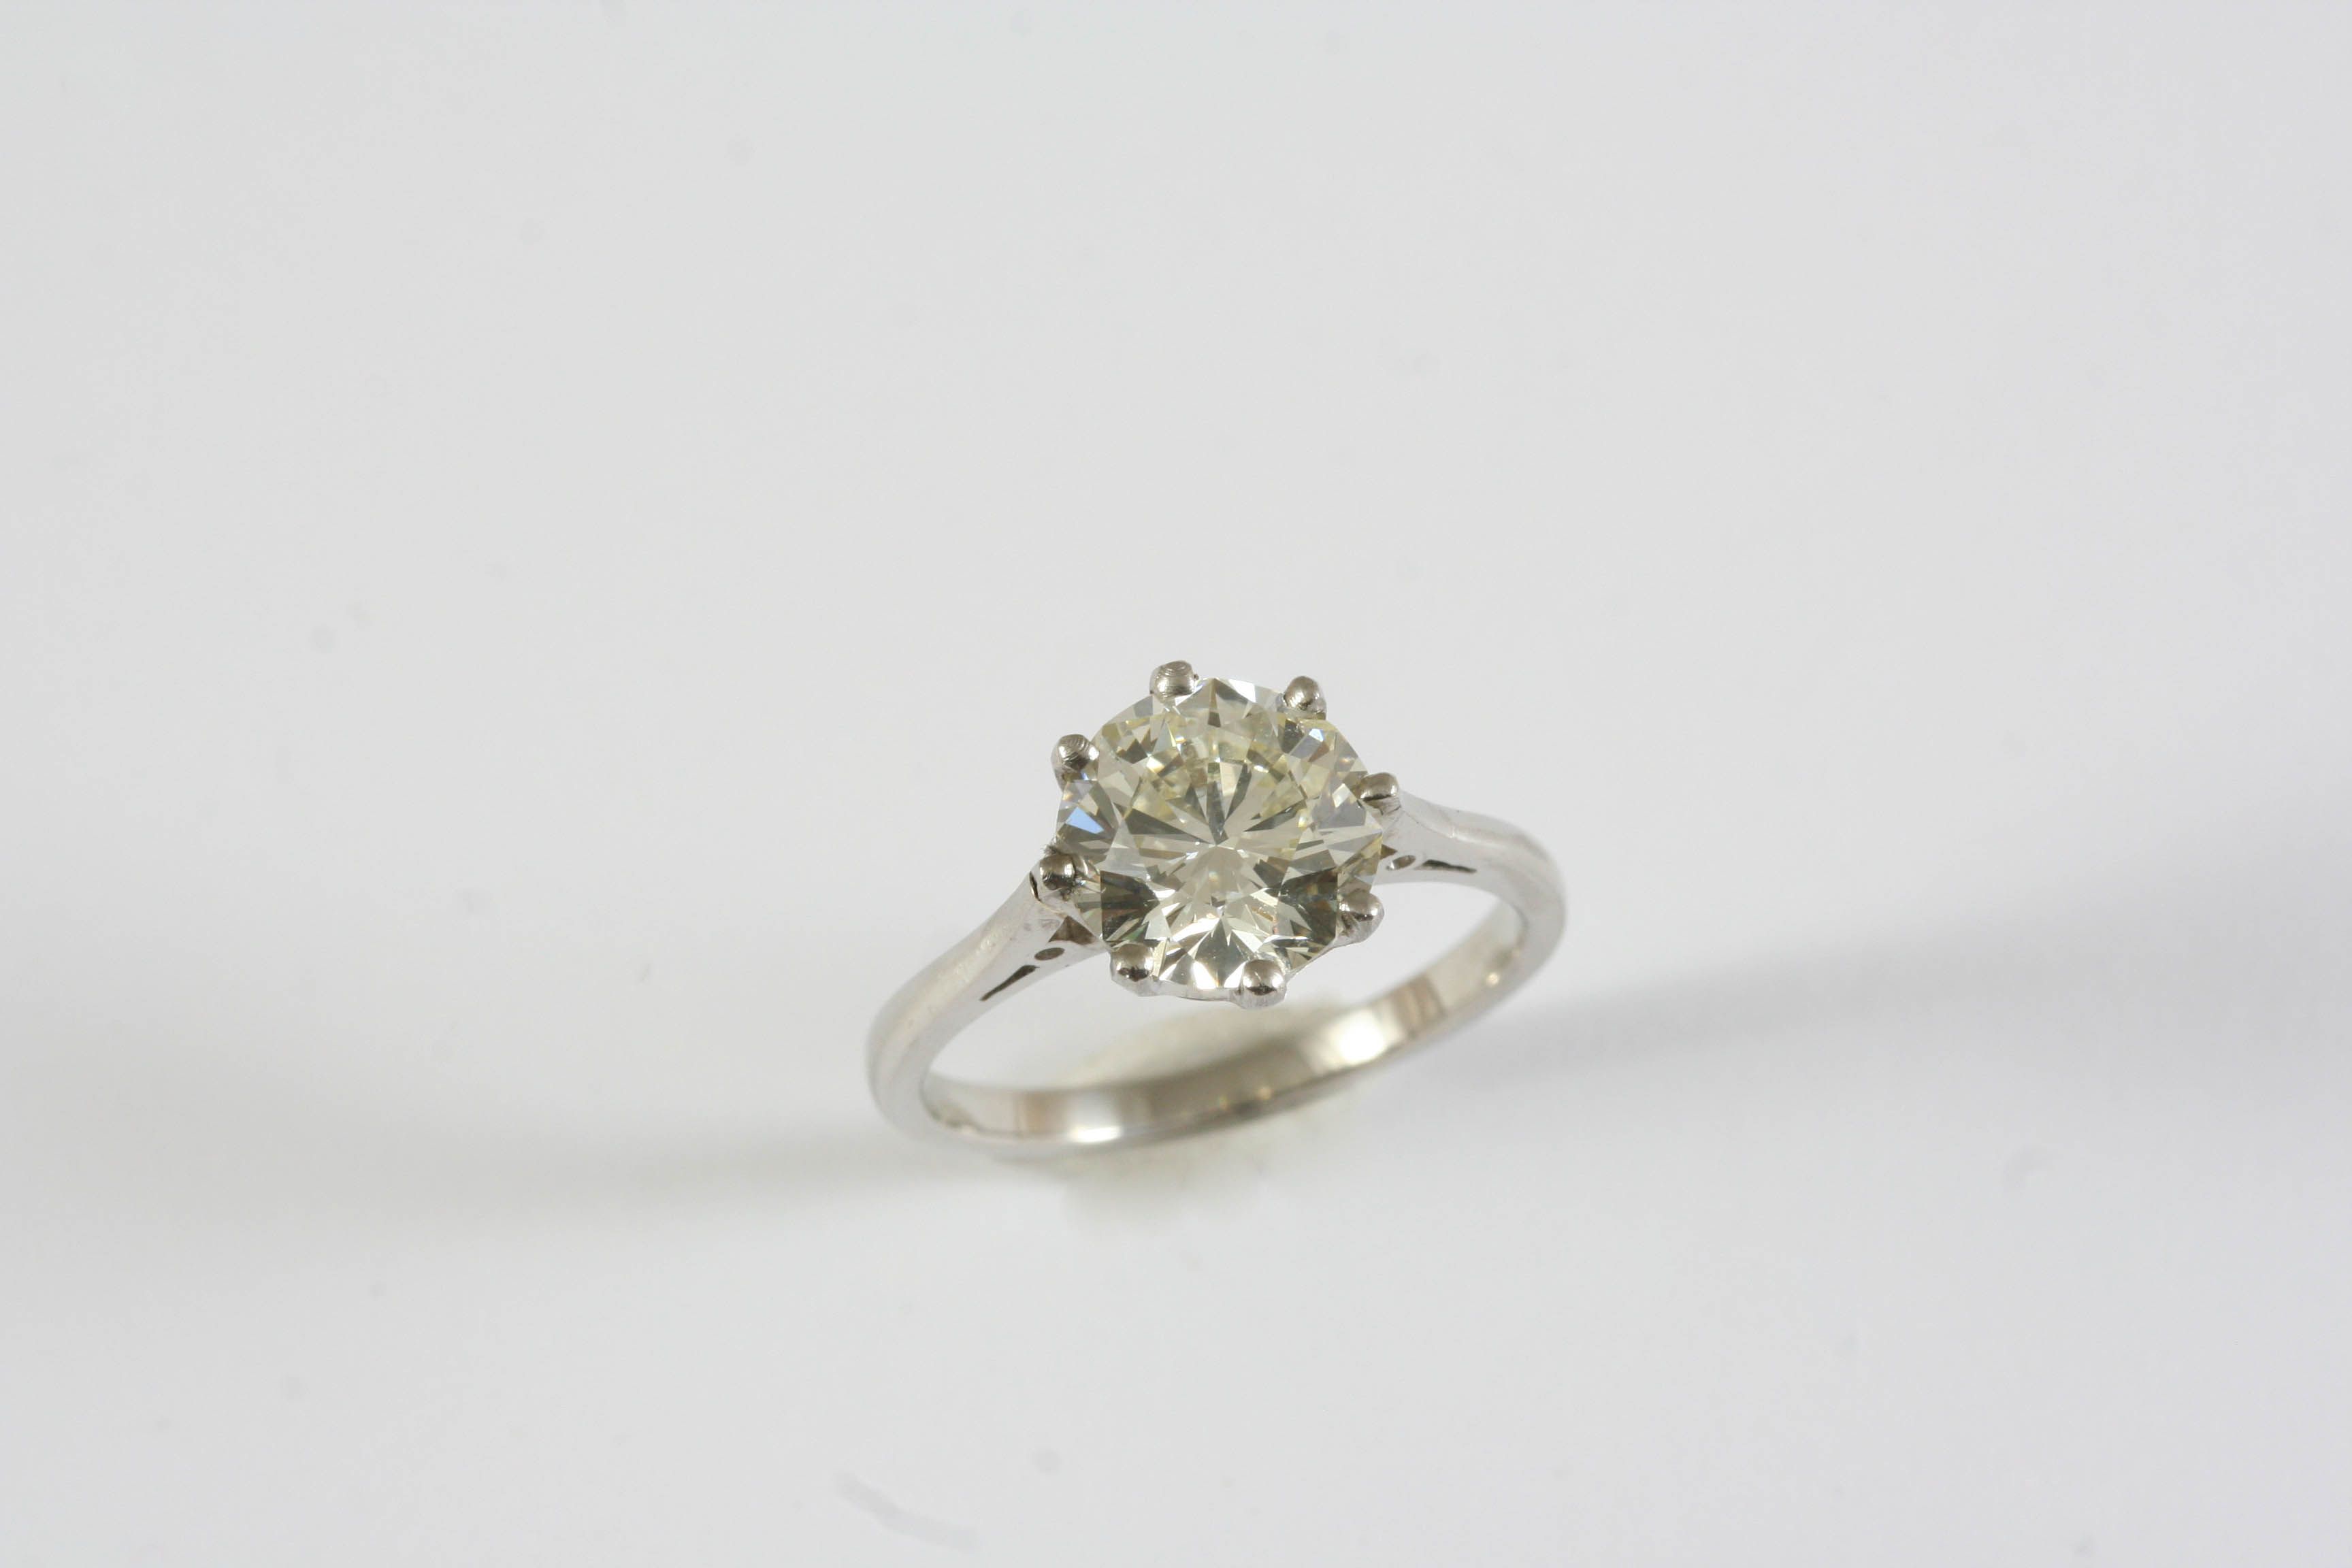 A DIAMOND SOLITAIRE RING the brilliant-cut diamond weighs 2.16 carats and is set in platinum. Size L